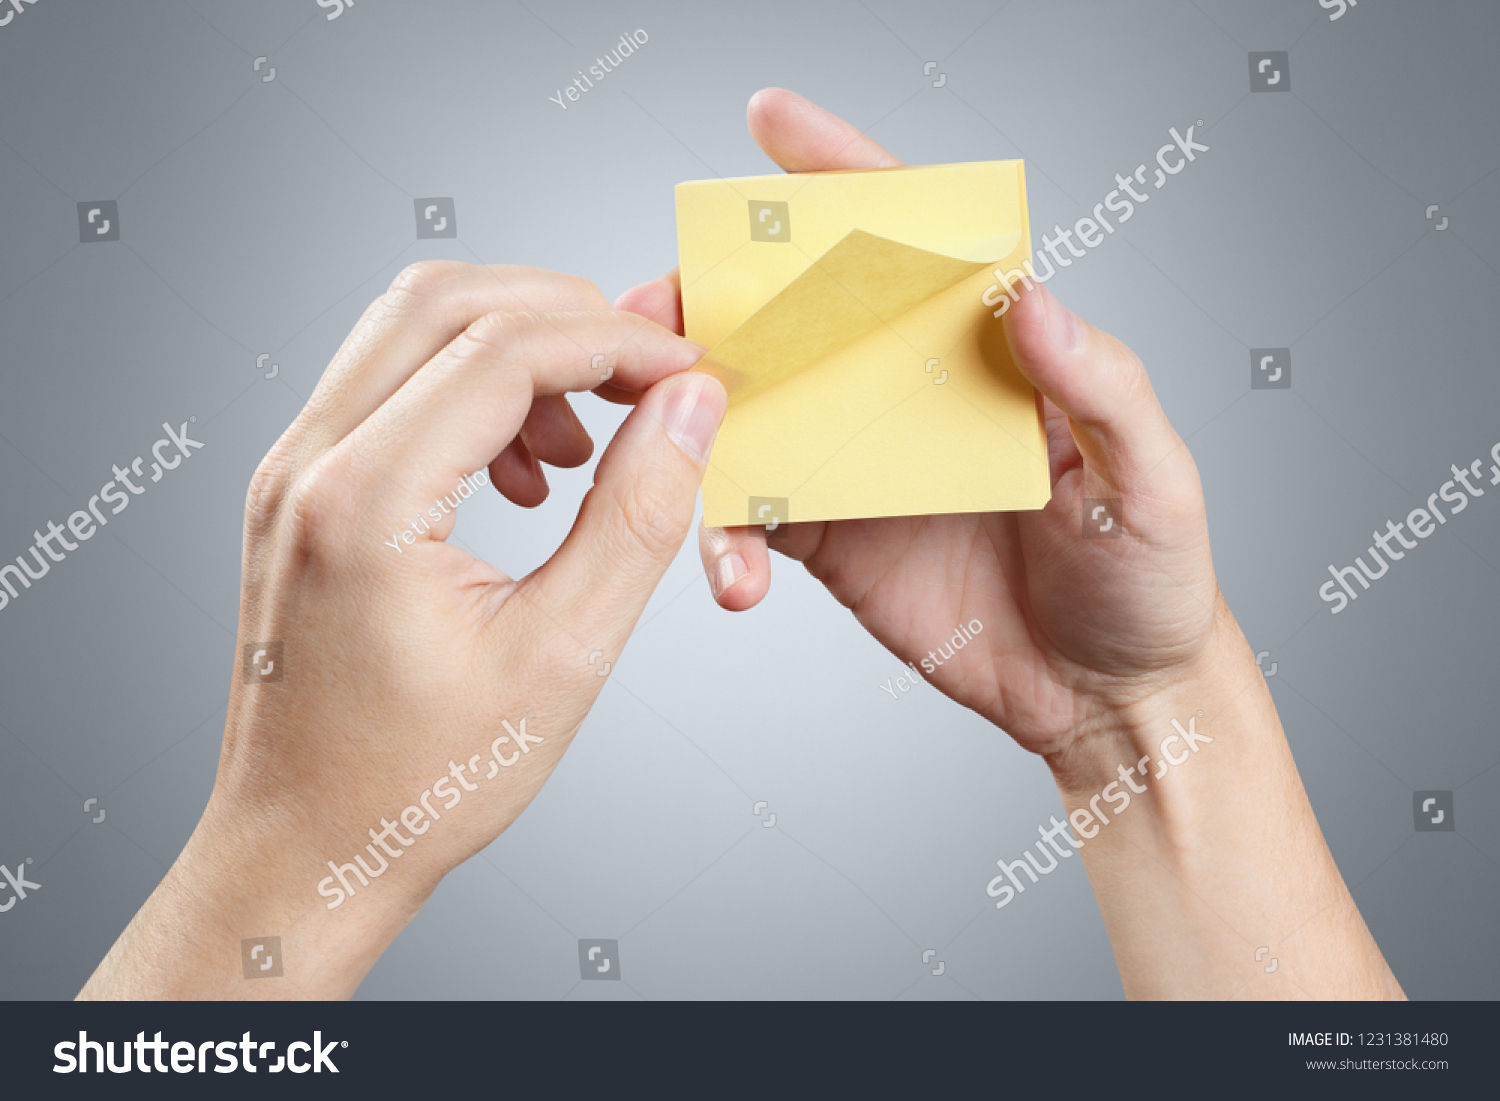 Hands holding a stack of yellow stickers on grey background #1231381480